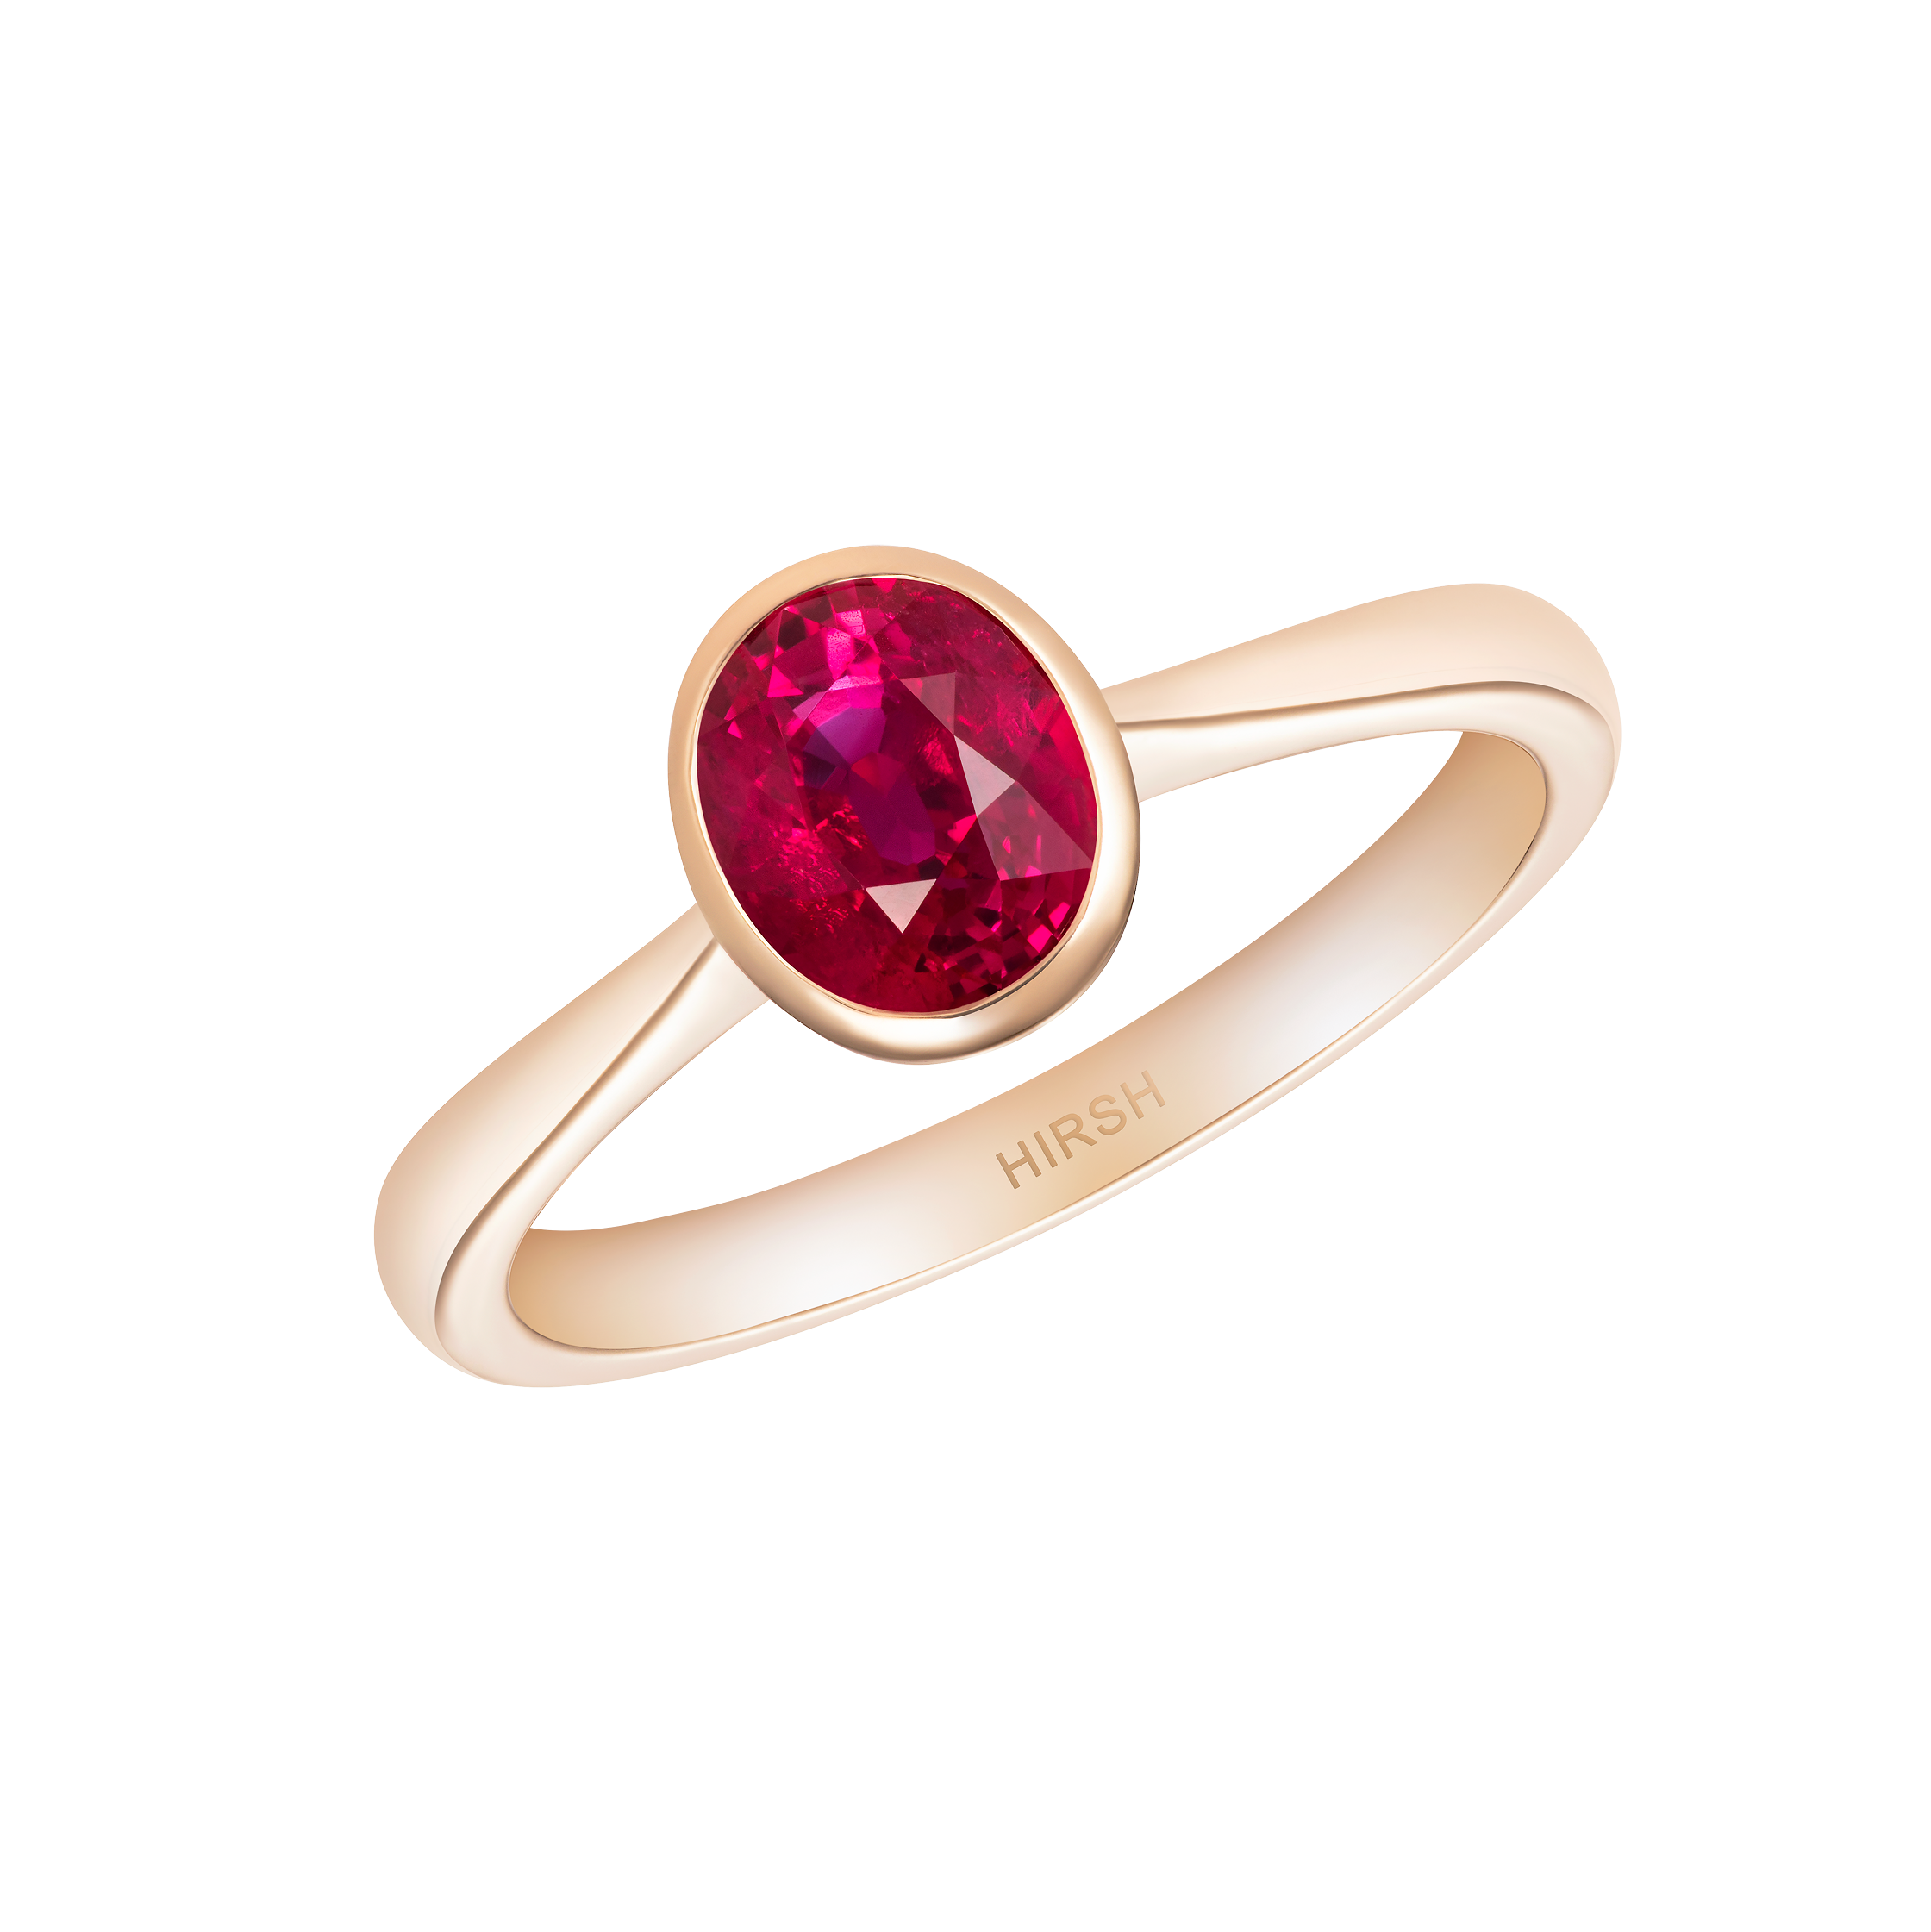 3Ct Oval Cut Red Ruby Diamond Solitaire Engagement Ring 14K Yellow Gold  Finish | eBay